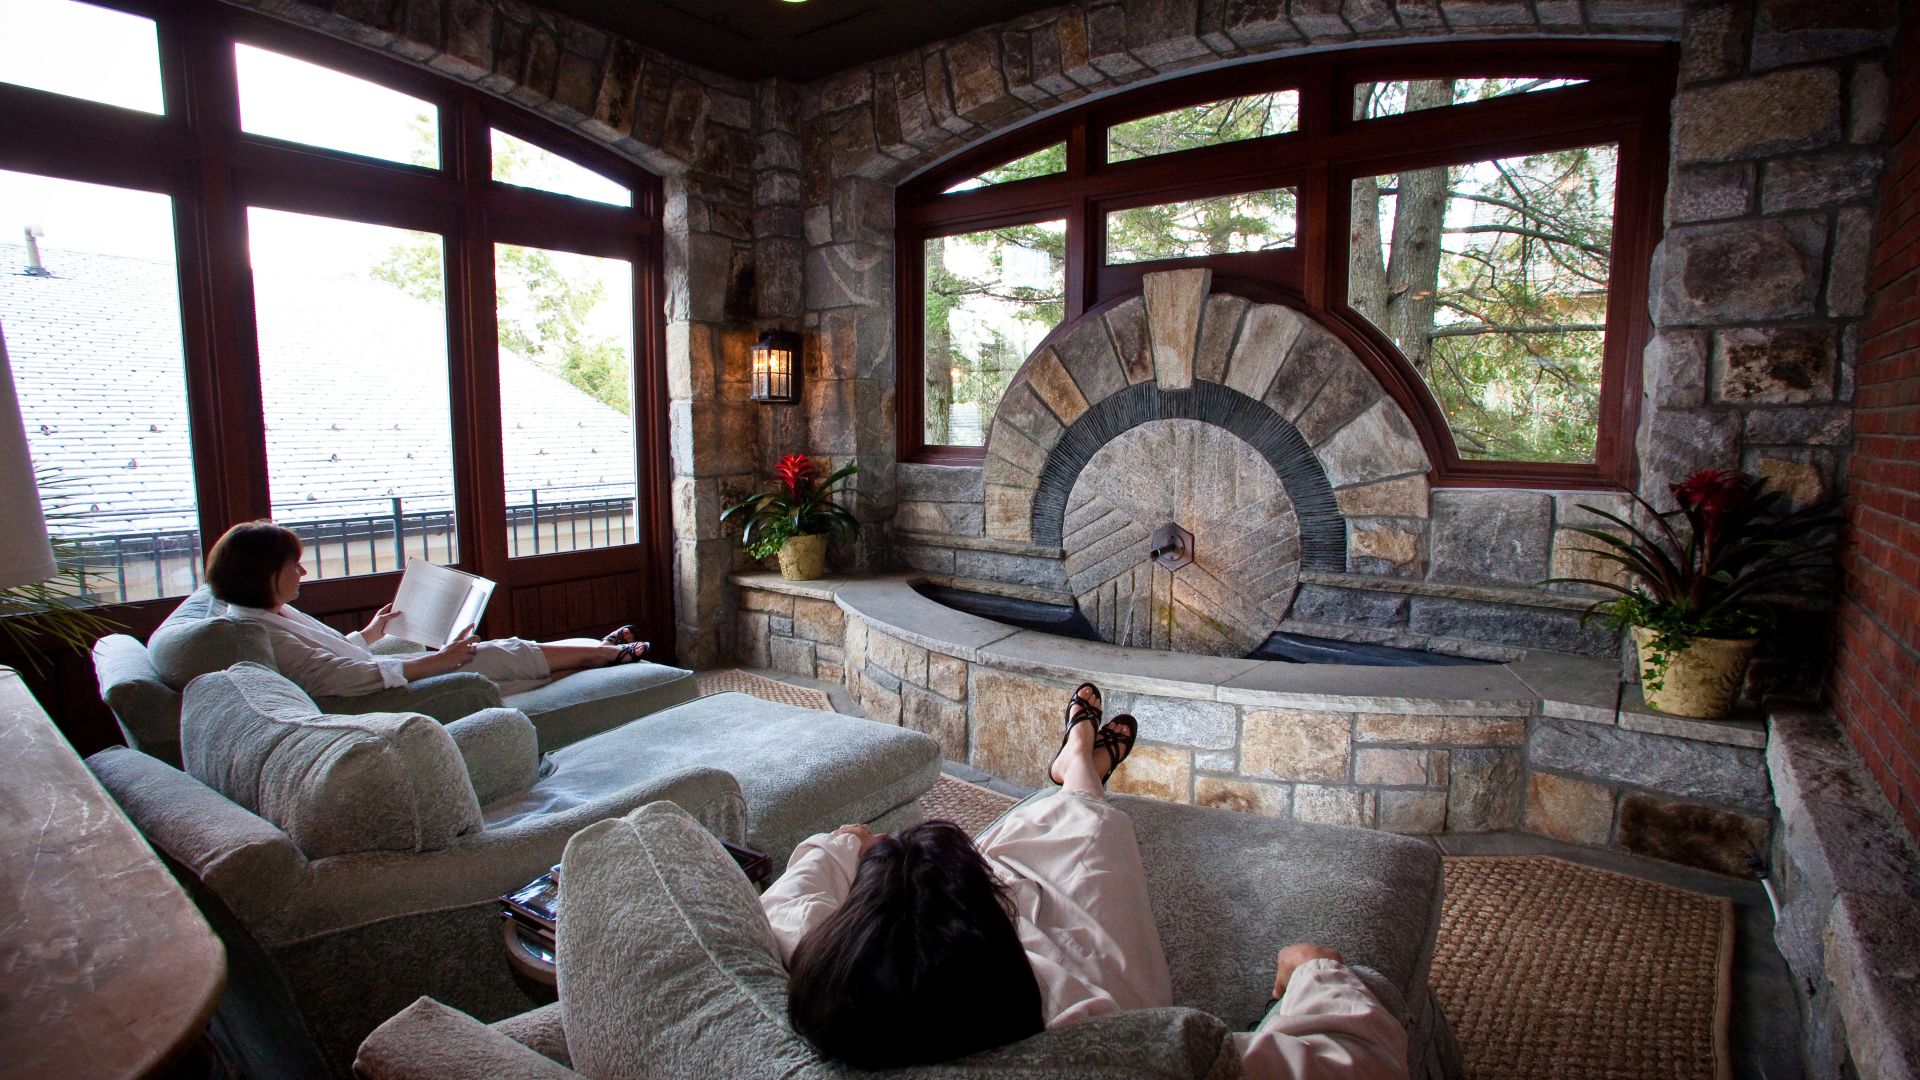 A Room Filled With Furniture And A Fire Place